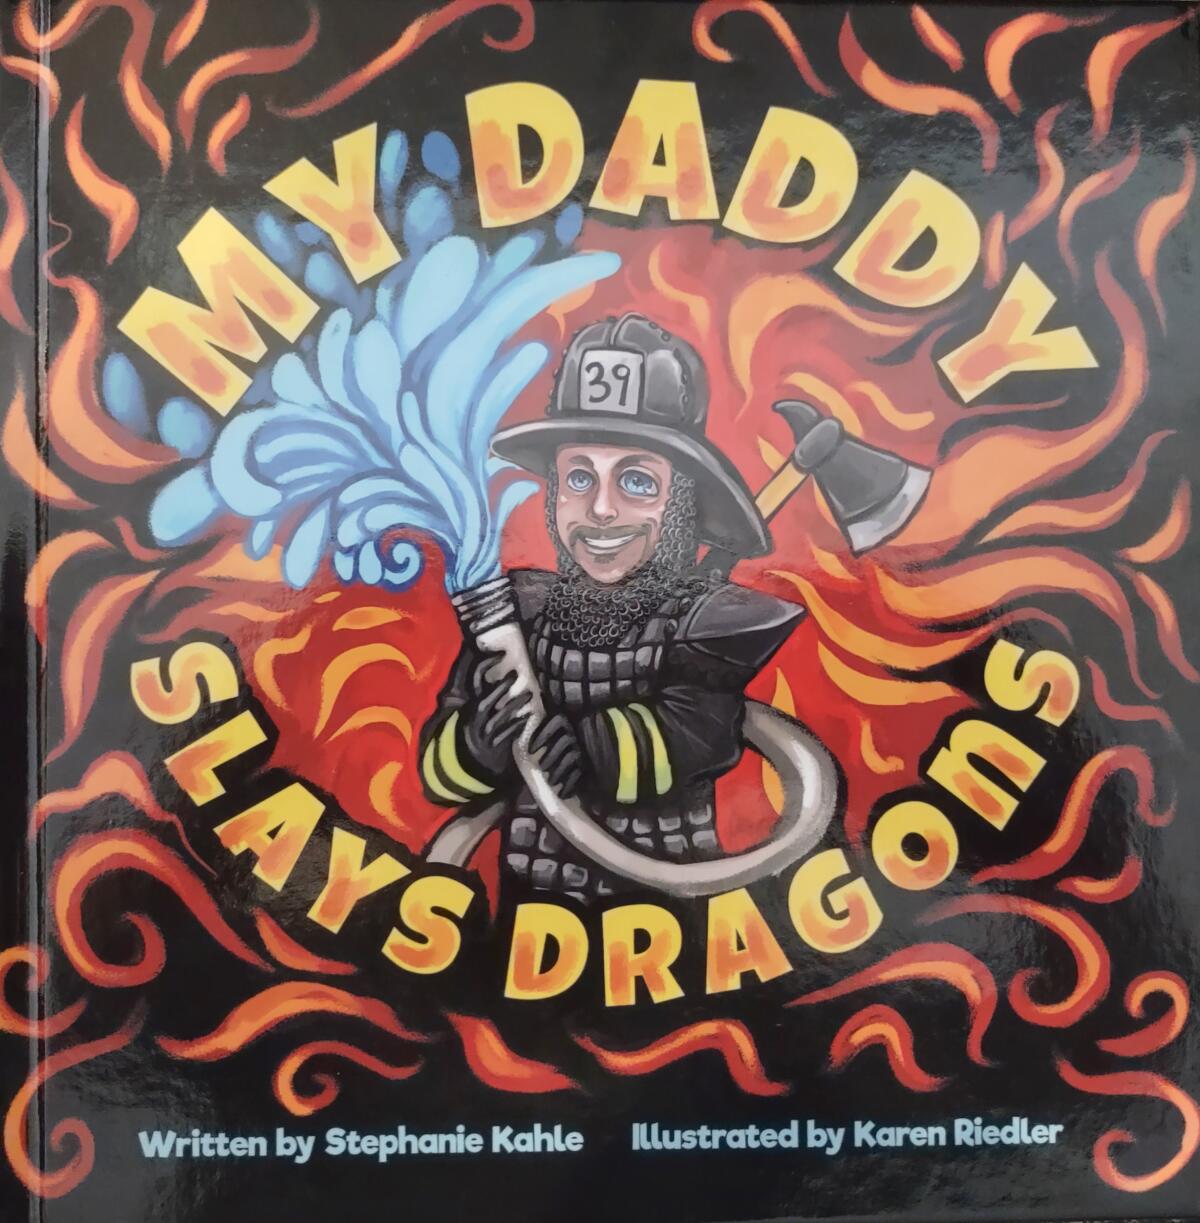 “My Daddy Slays Dragons” explains to Stephanie Kahle’s son, Tehren, why his dad, Ehren, was away from home fighting fires.